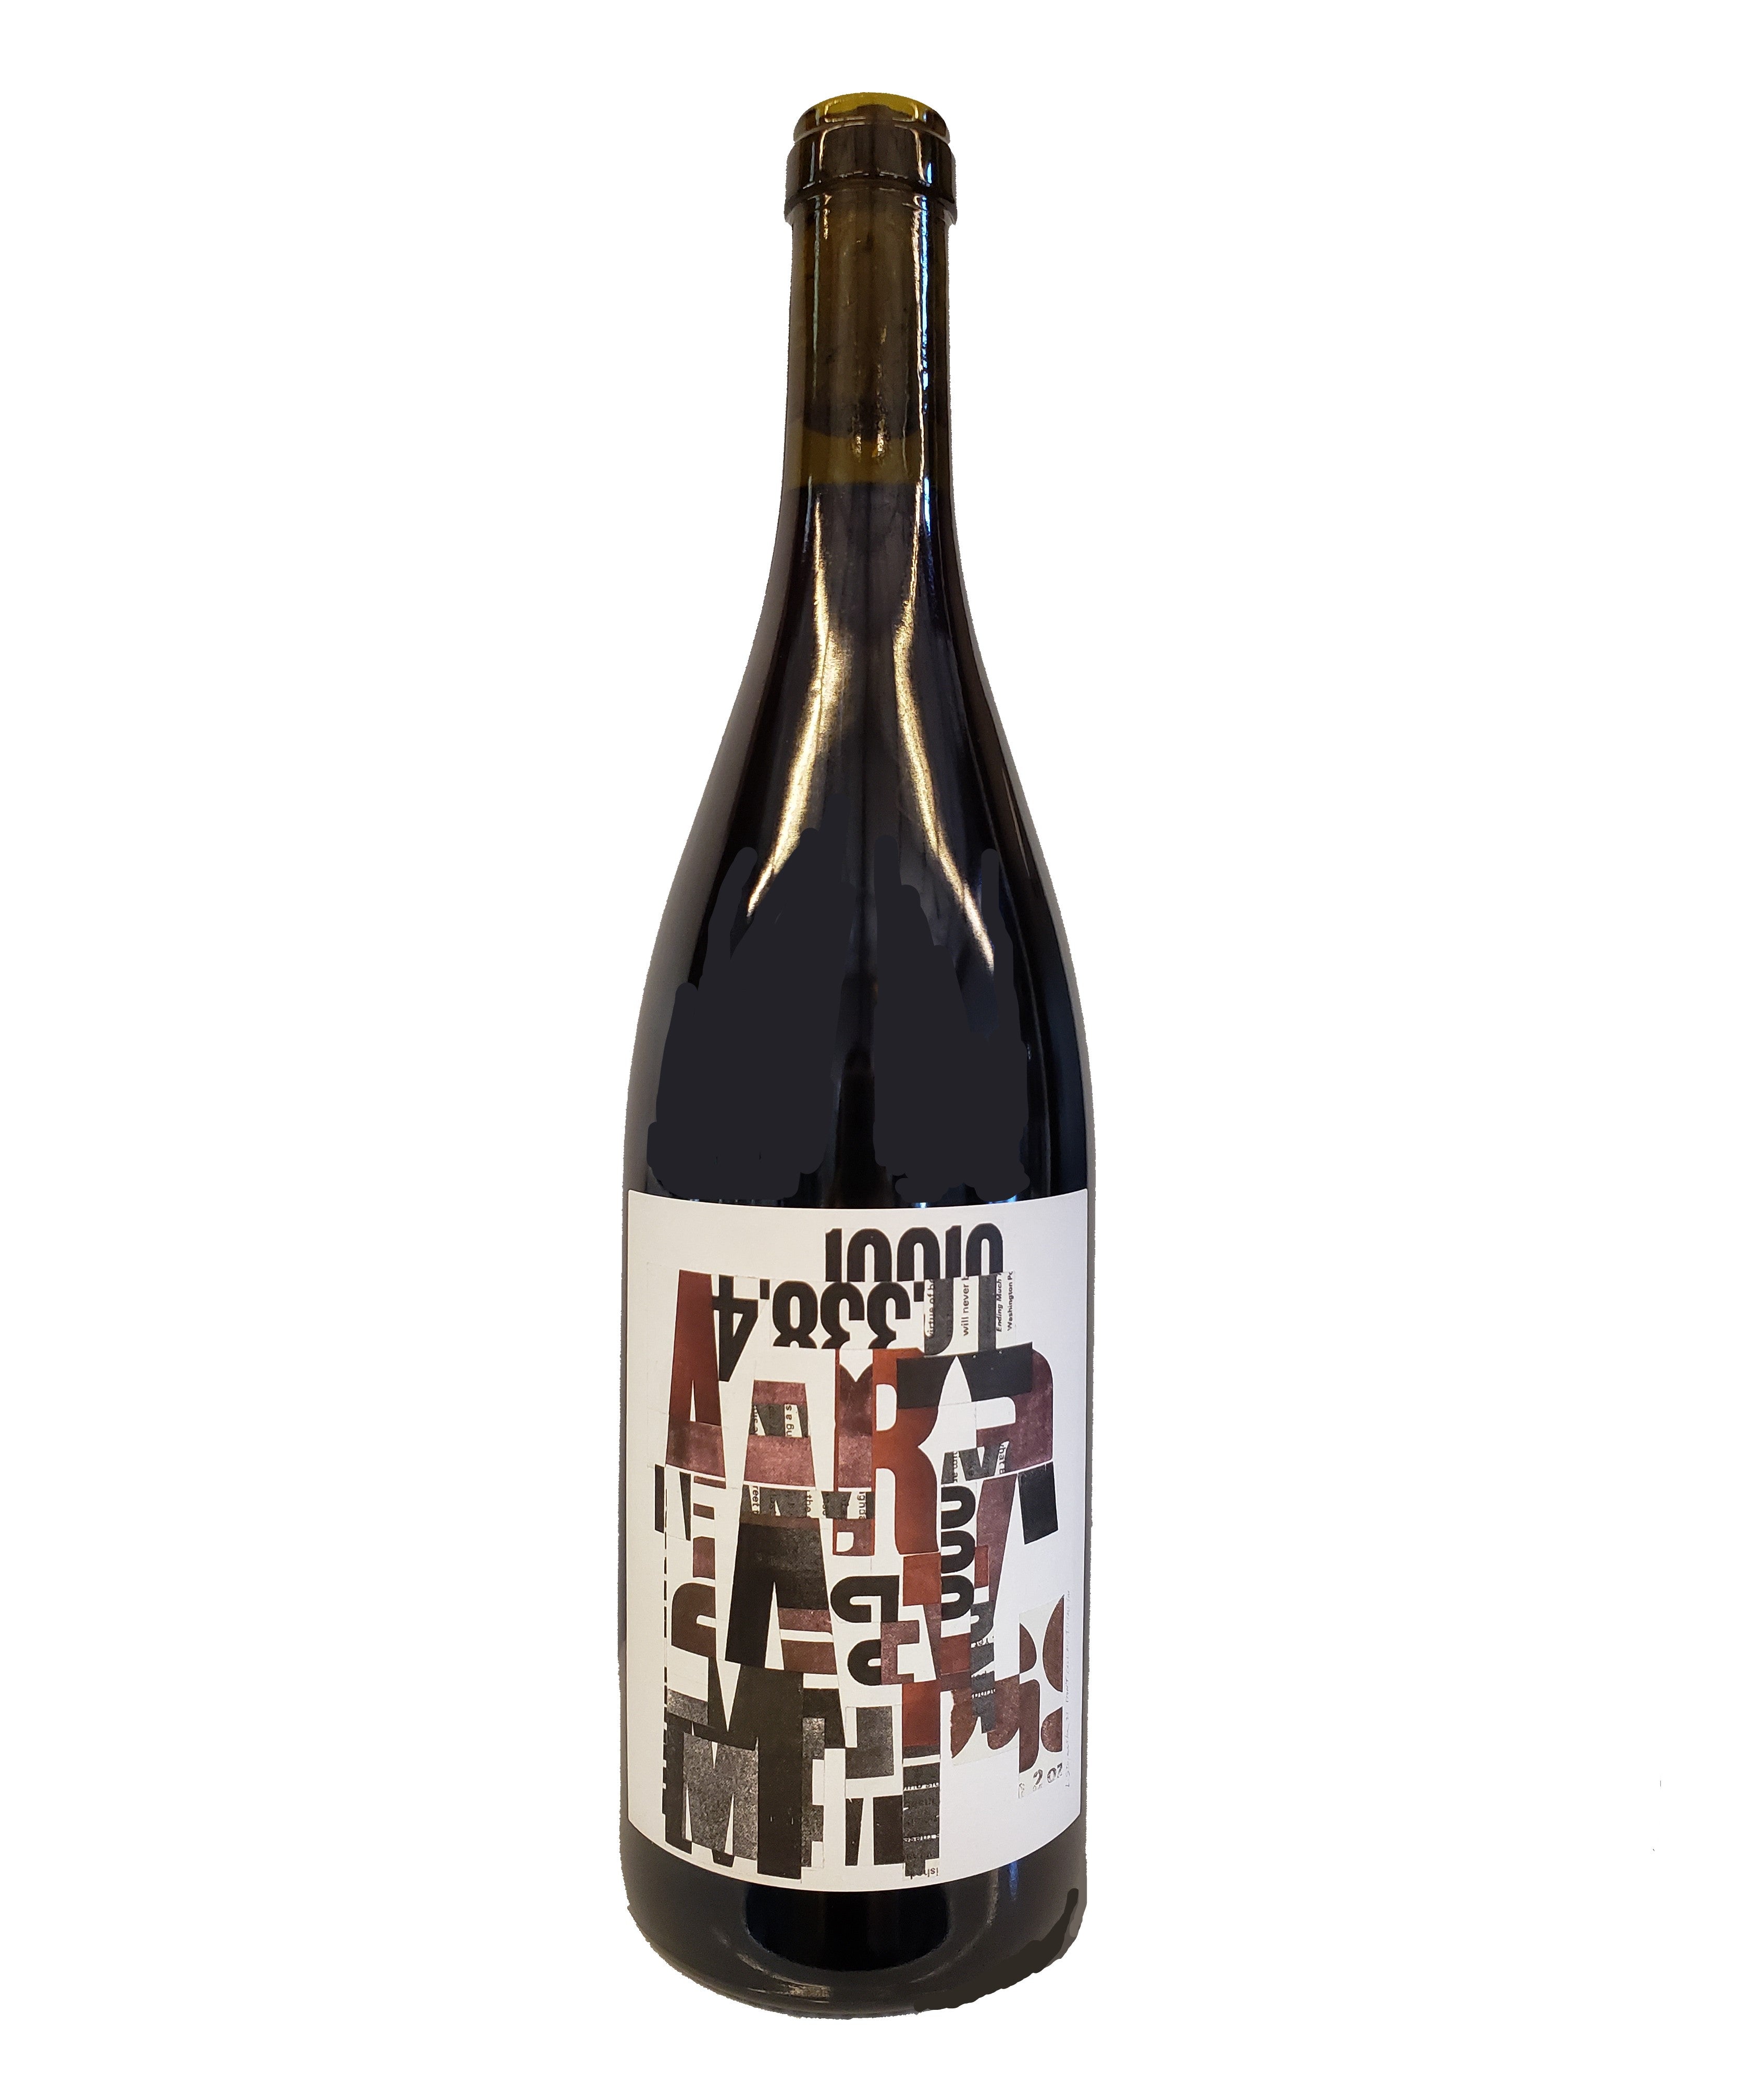 Burgundy-style bottle with the Wine Snob* 2020 Pinot Noir label featuring artwork by Laurie Szujewska. The artwork is a collage of letters and numbers in shades of brown, grey, and black, with a white background.